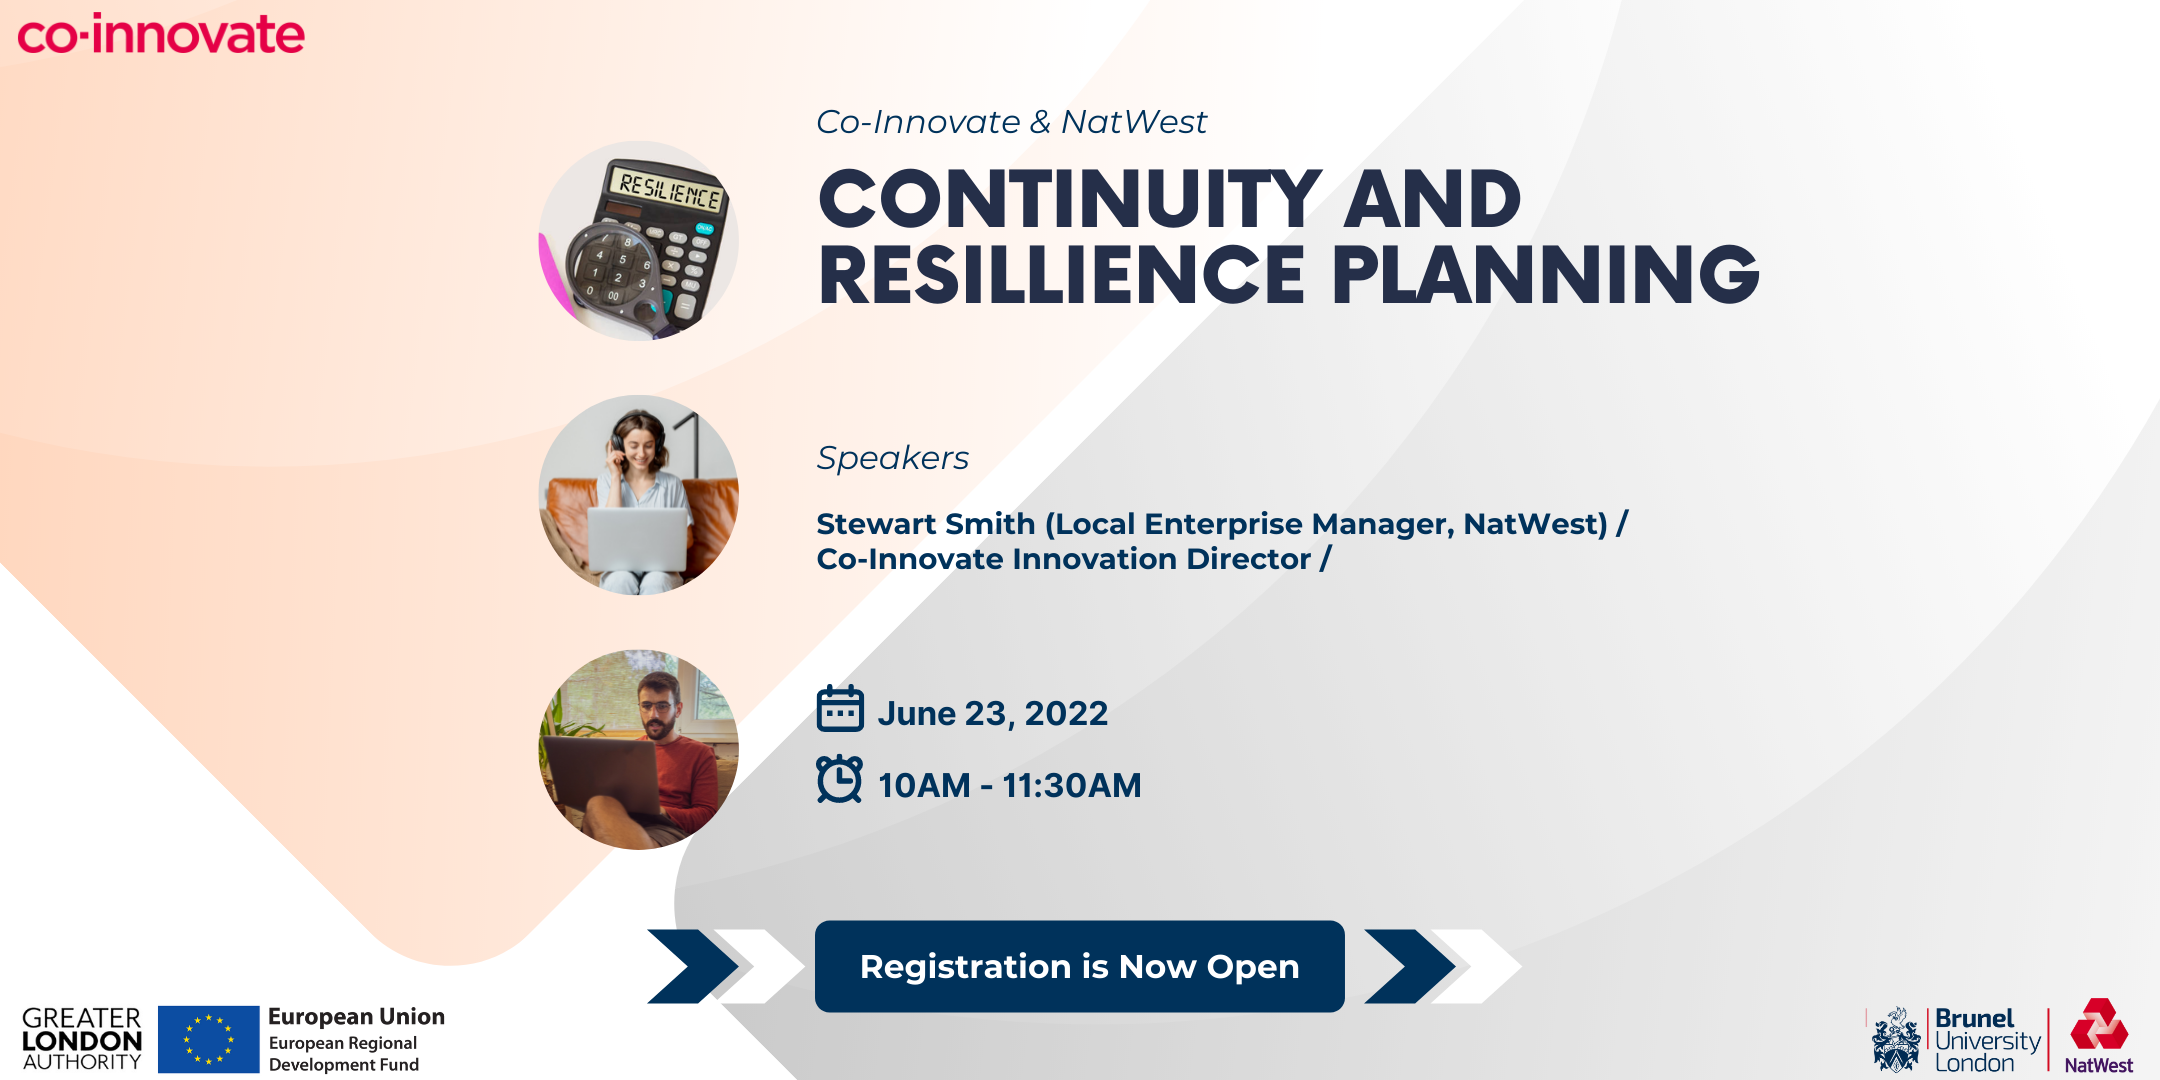 Co-Innovate & NatWest - Continuity & Resilience Planning